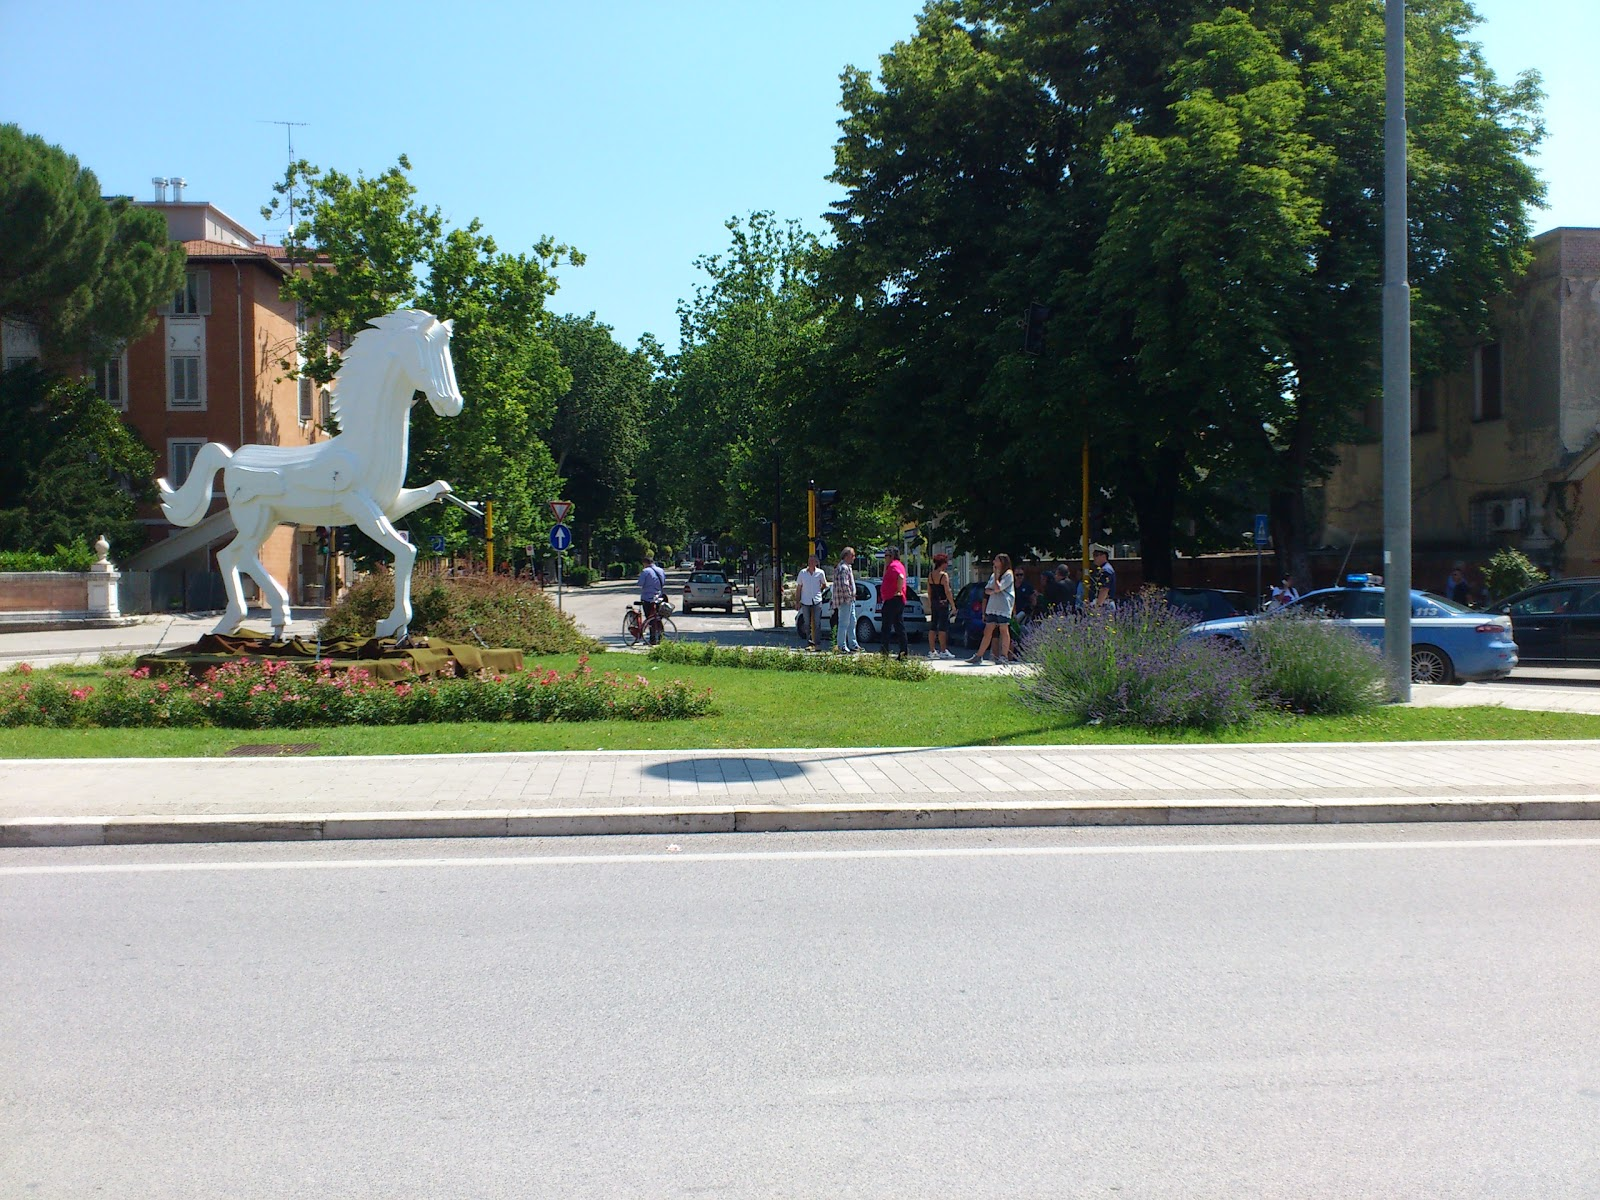 The missing left leg of this horse statue attracted the attention of locals and police!